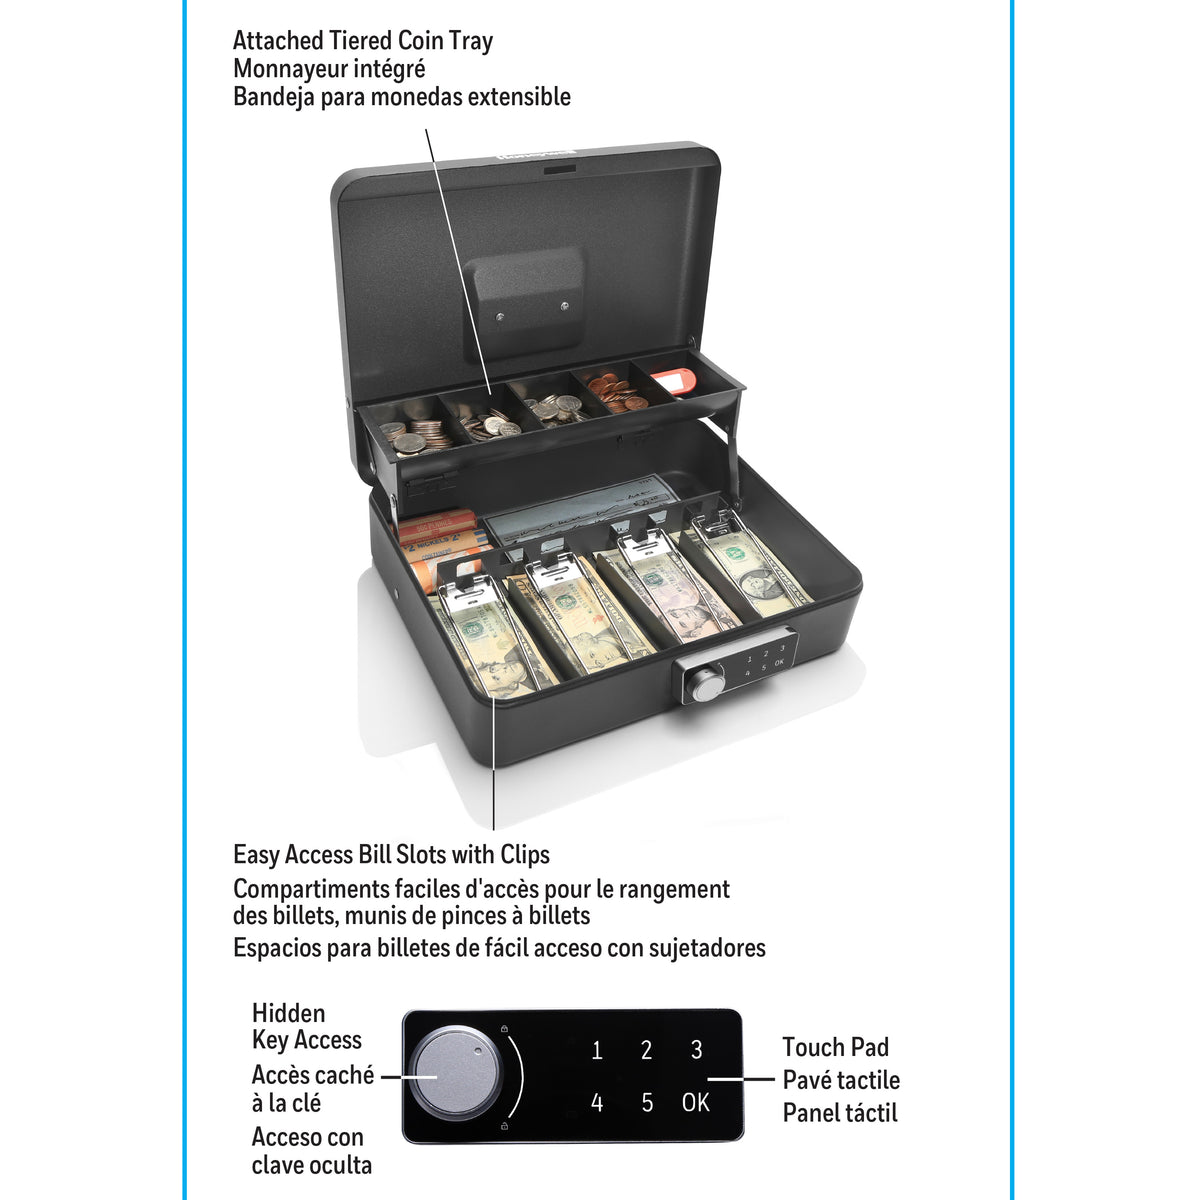 Honeywell 6213DG Digital Tiered Cash Box with Touchpad Lock Overview